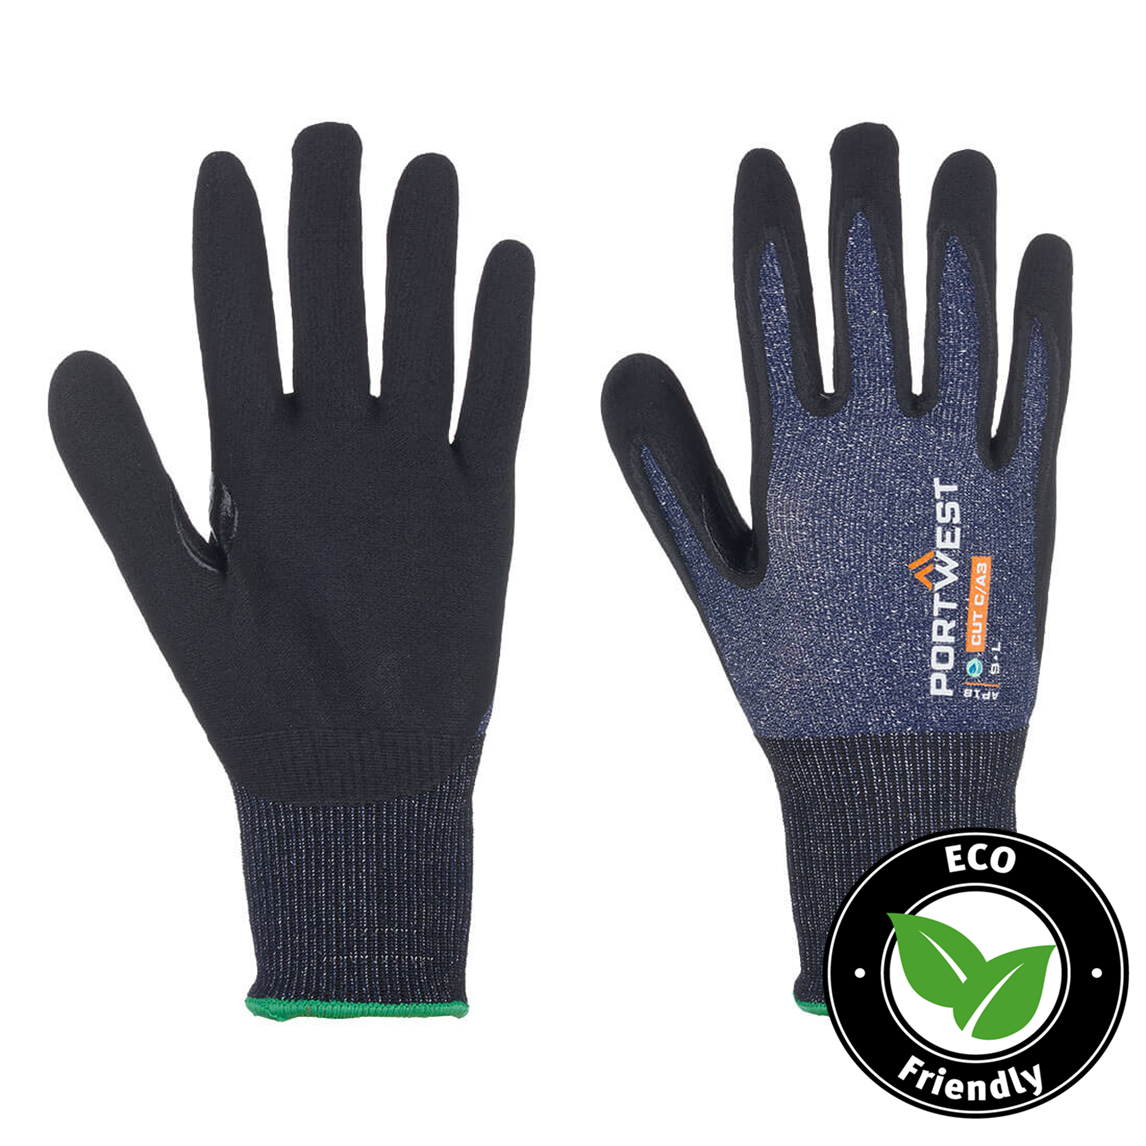 Portwest® Planet AP18 Micro Foam Nitrile Coated Work Gloves are constructed with a 15-gauge yarn made from recycled PET water bottles has moisture managing properties. These touchscreen compatible cut level A3 gloves are breathable and produces a low carbon footprint.